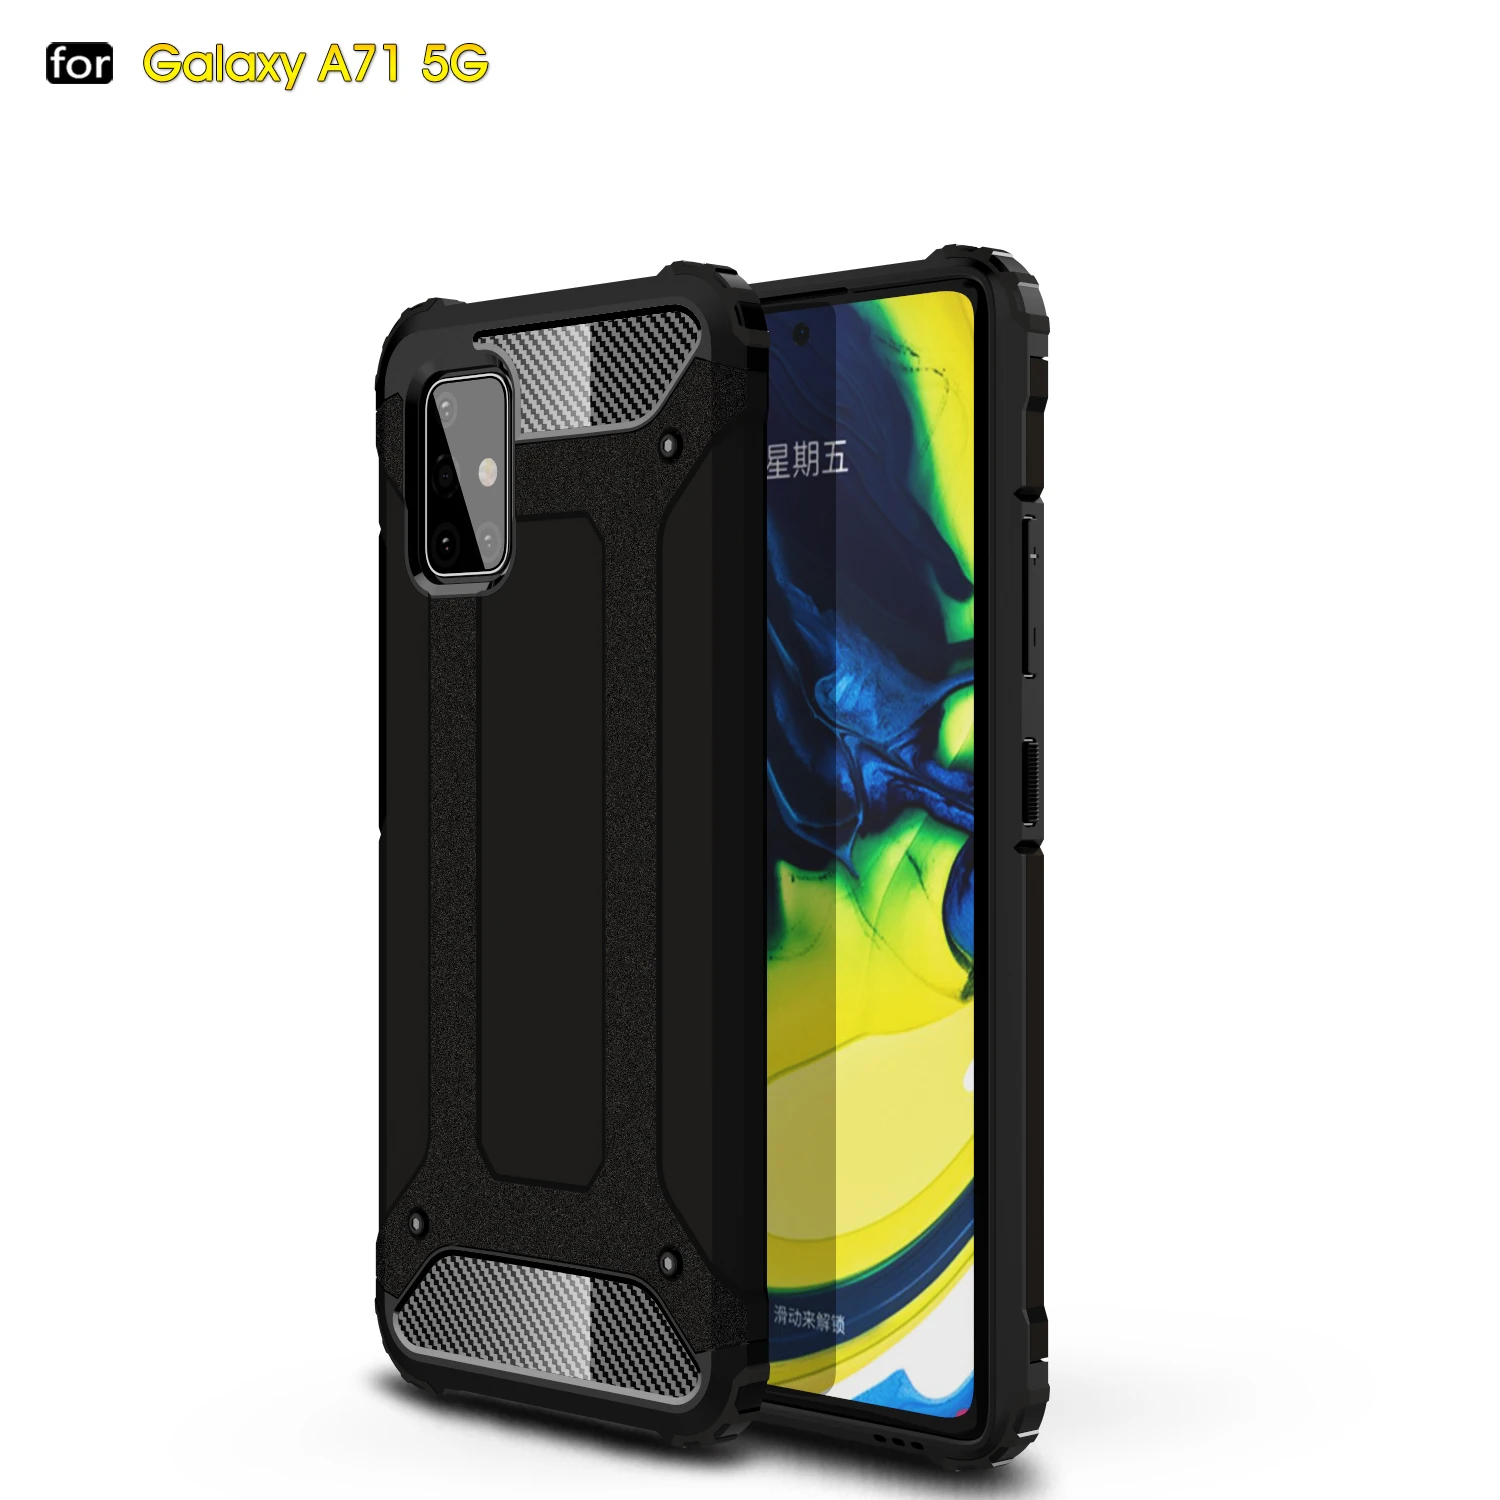 

Shockproof Case For Samsung Galaxy A71 A51 5G A81 A91 A41 A31 A21 A21S A11 A01 Rugged Layer Armor Protection Shell A6 Plus 2018